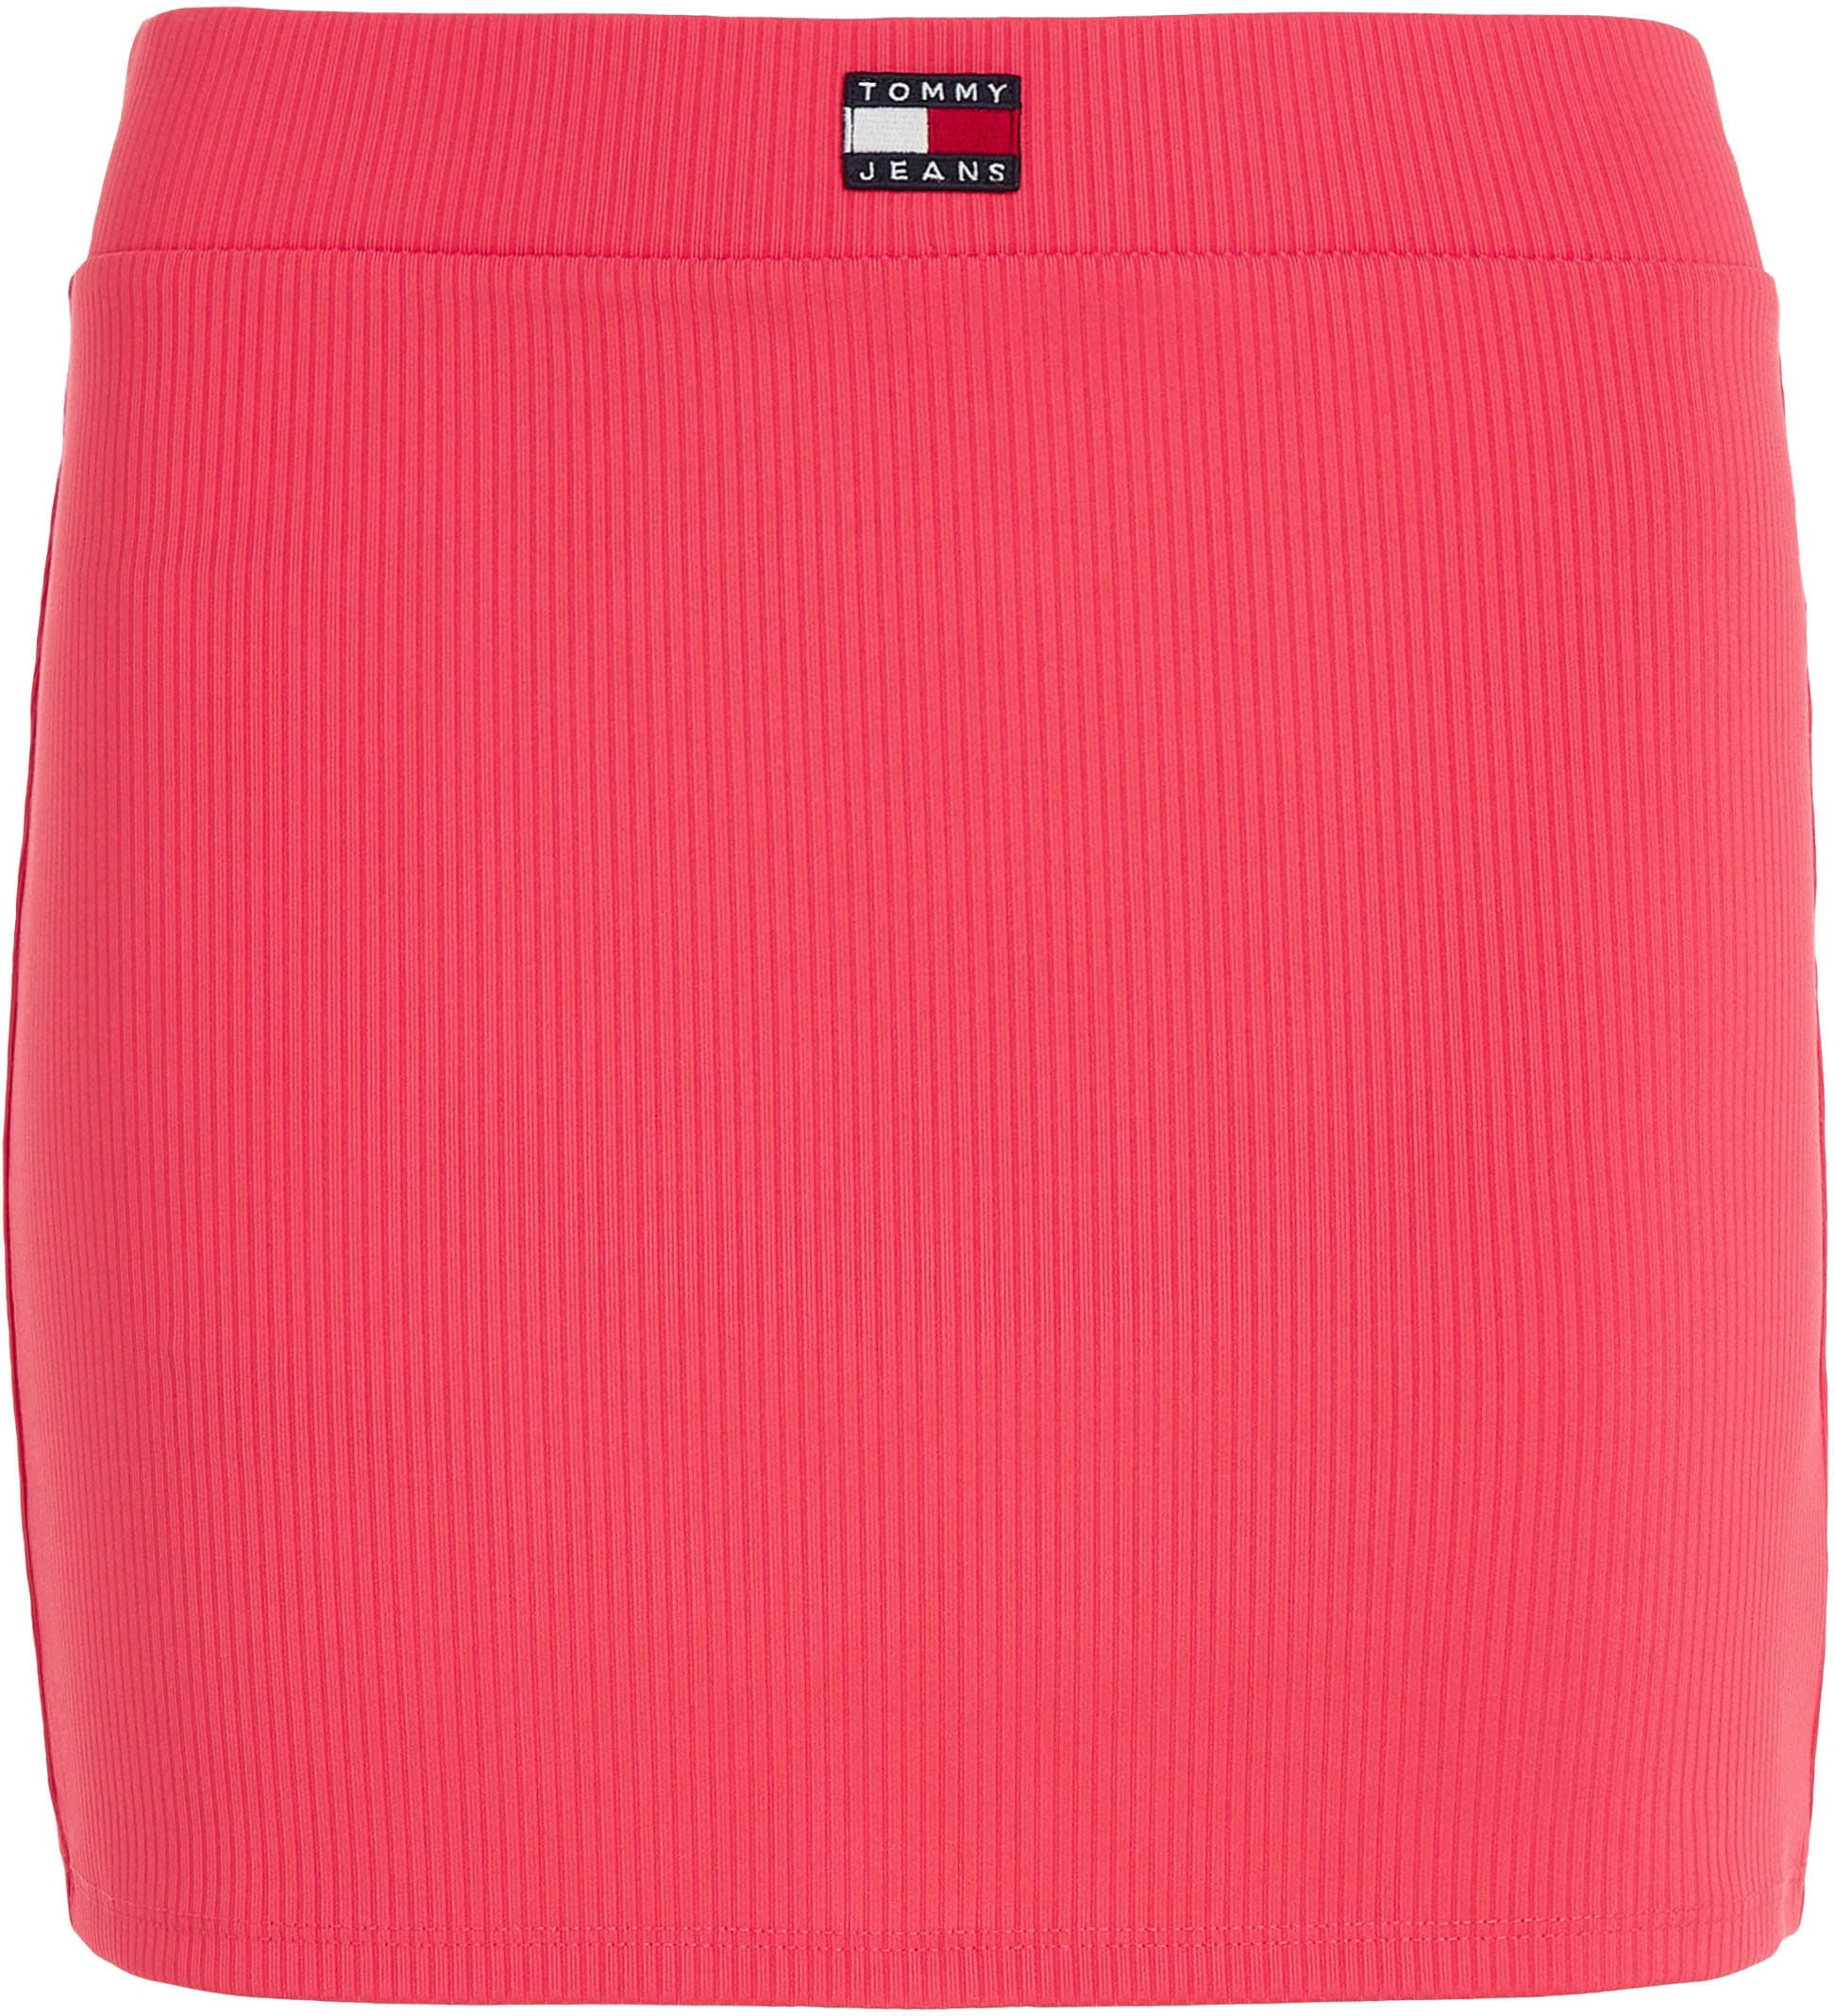 Tommy Jeans Minirock »LOW RISE bei ♕ MINI SKIRT« BADGE